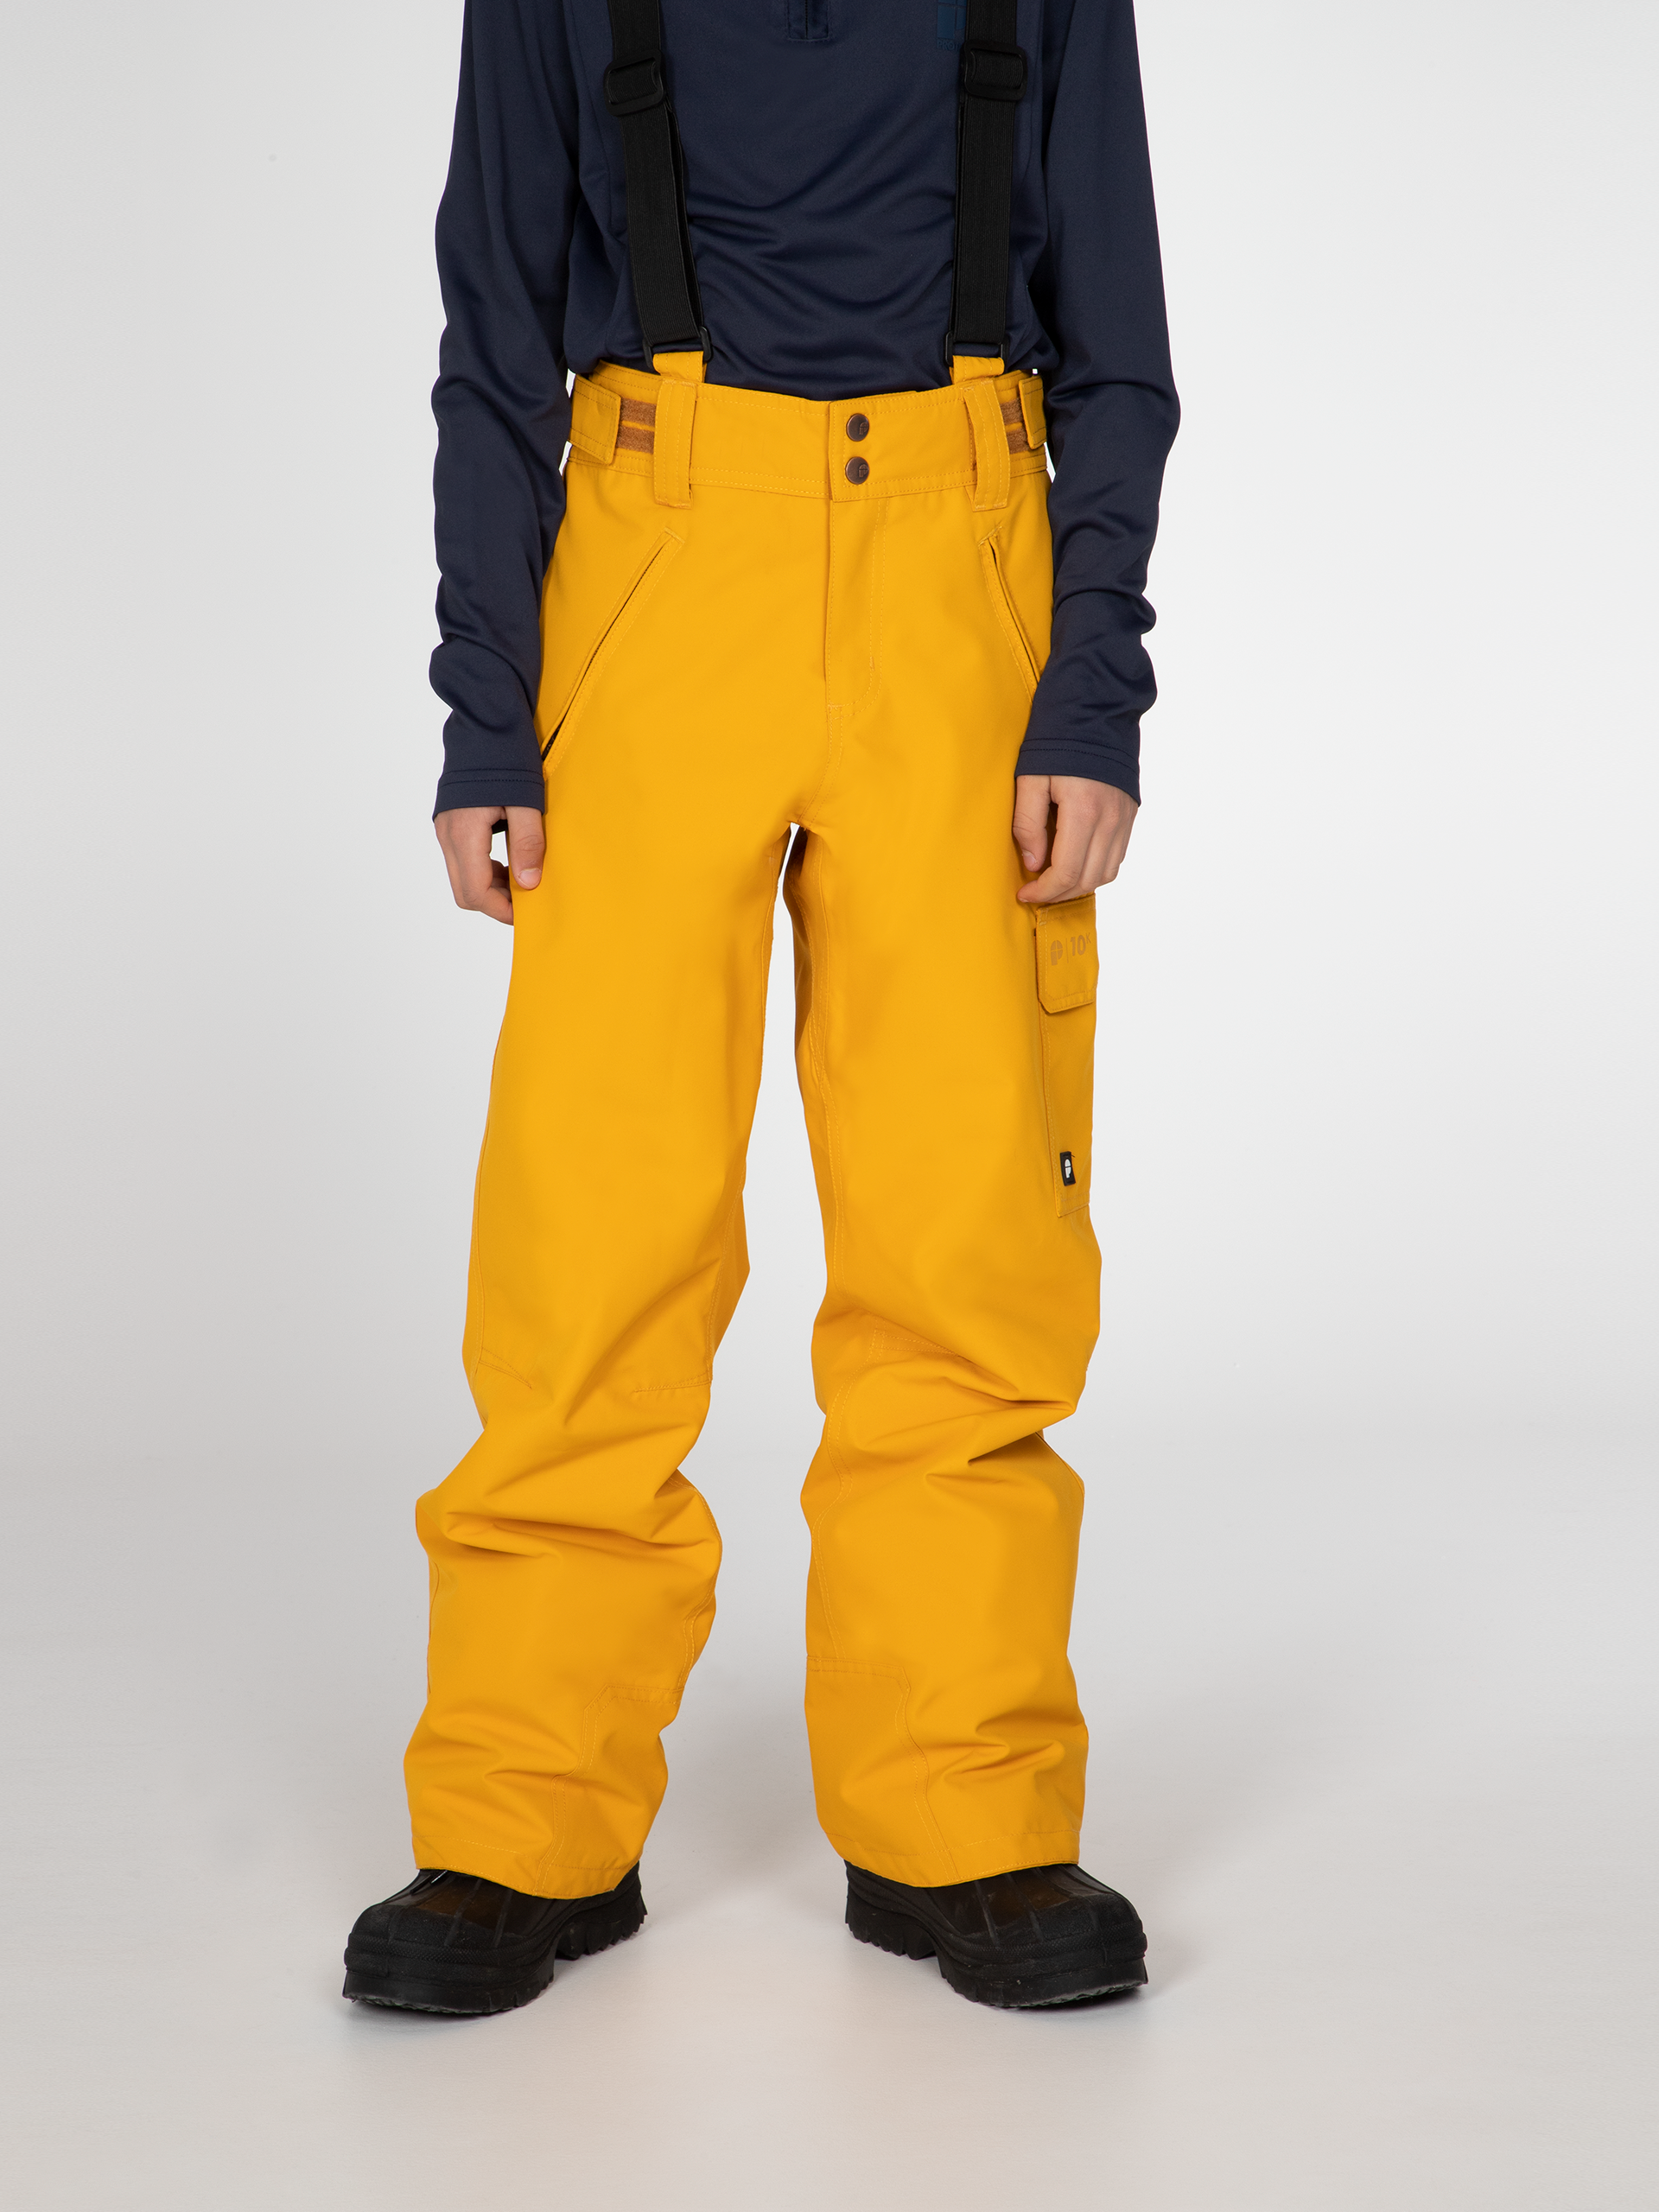 jr trousers with suspenders Yellow | PROTEST United States